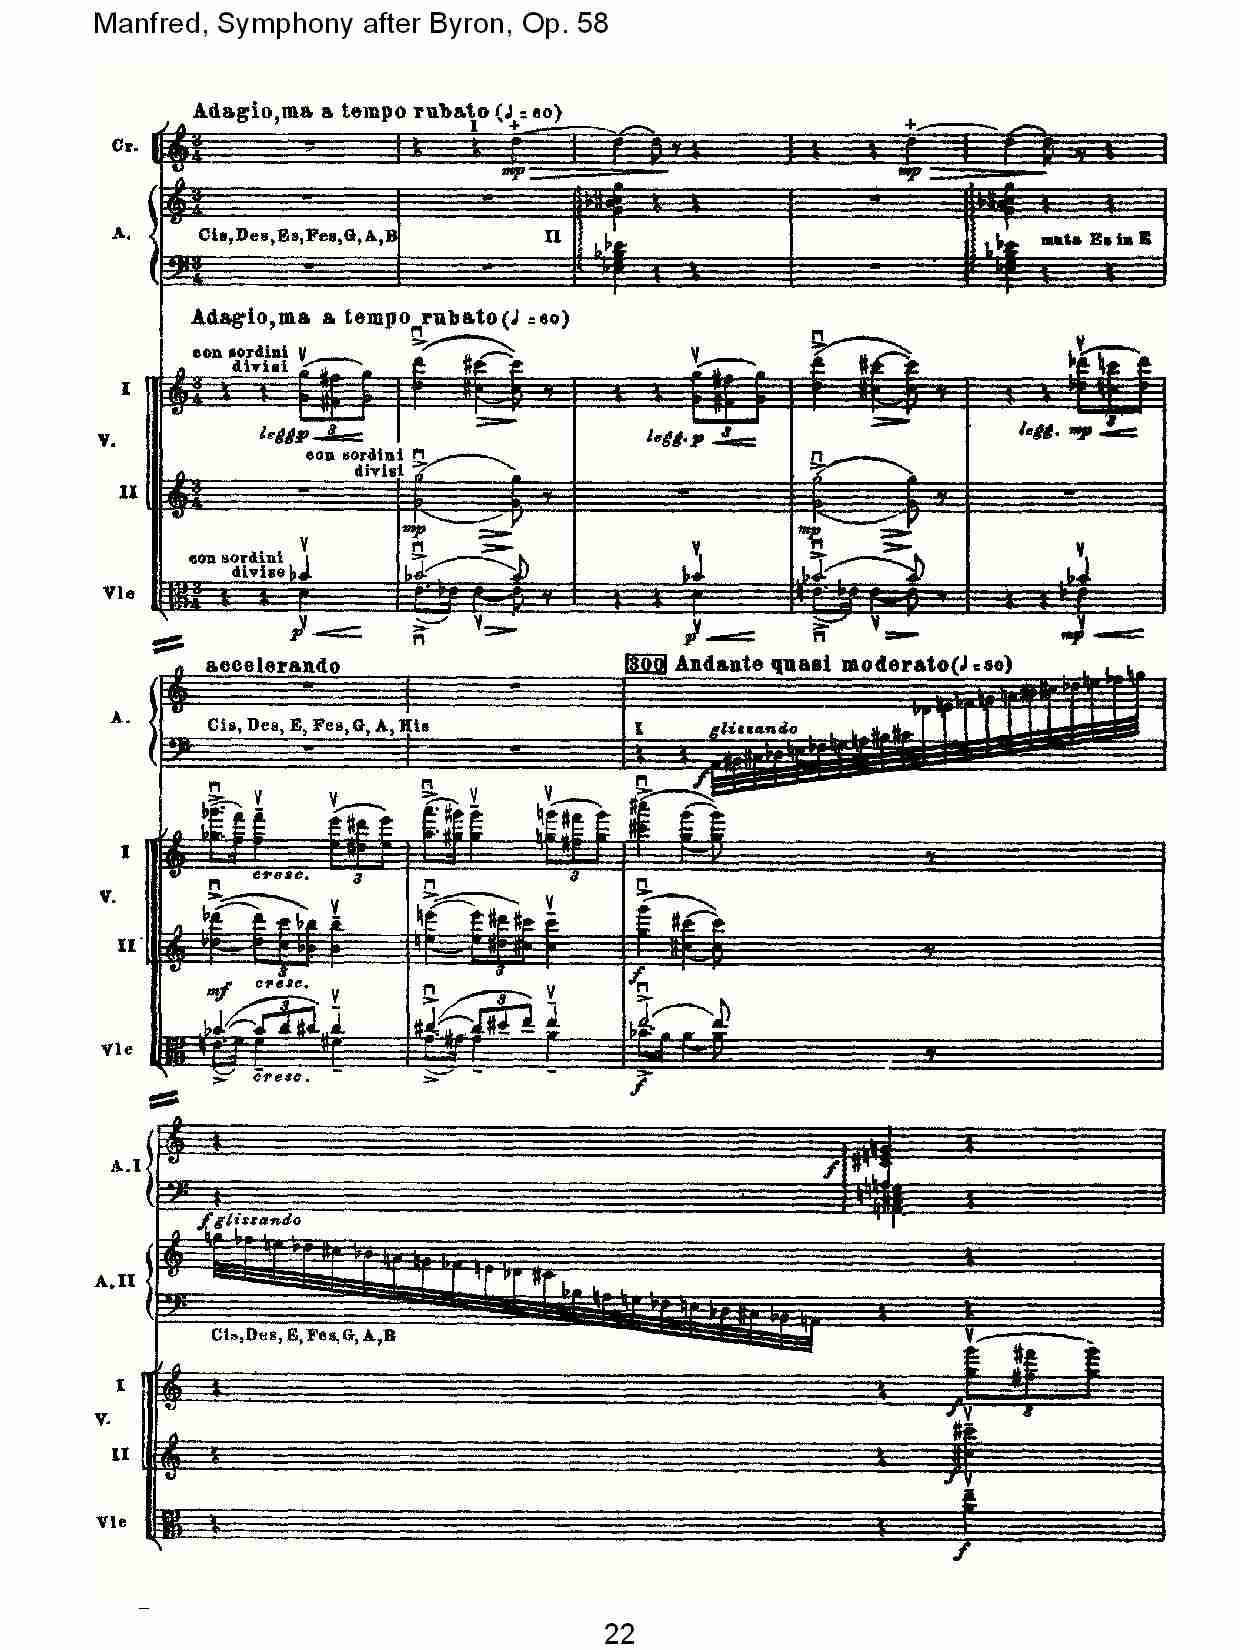 Manfred, Symphony after Byron, Op.58第四乐章第二部（五）总谱（图2）